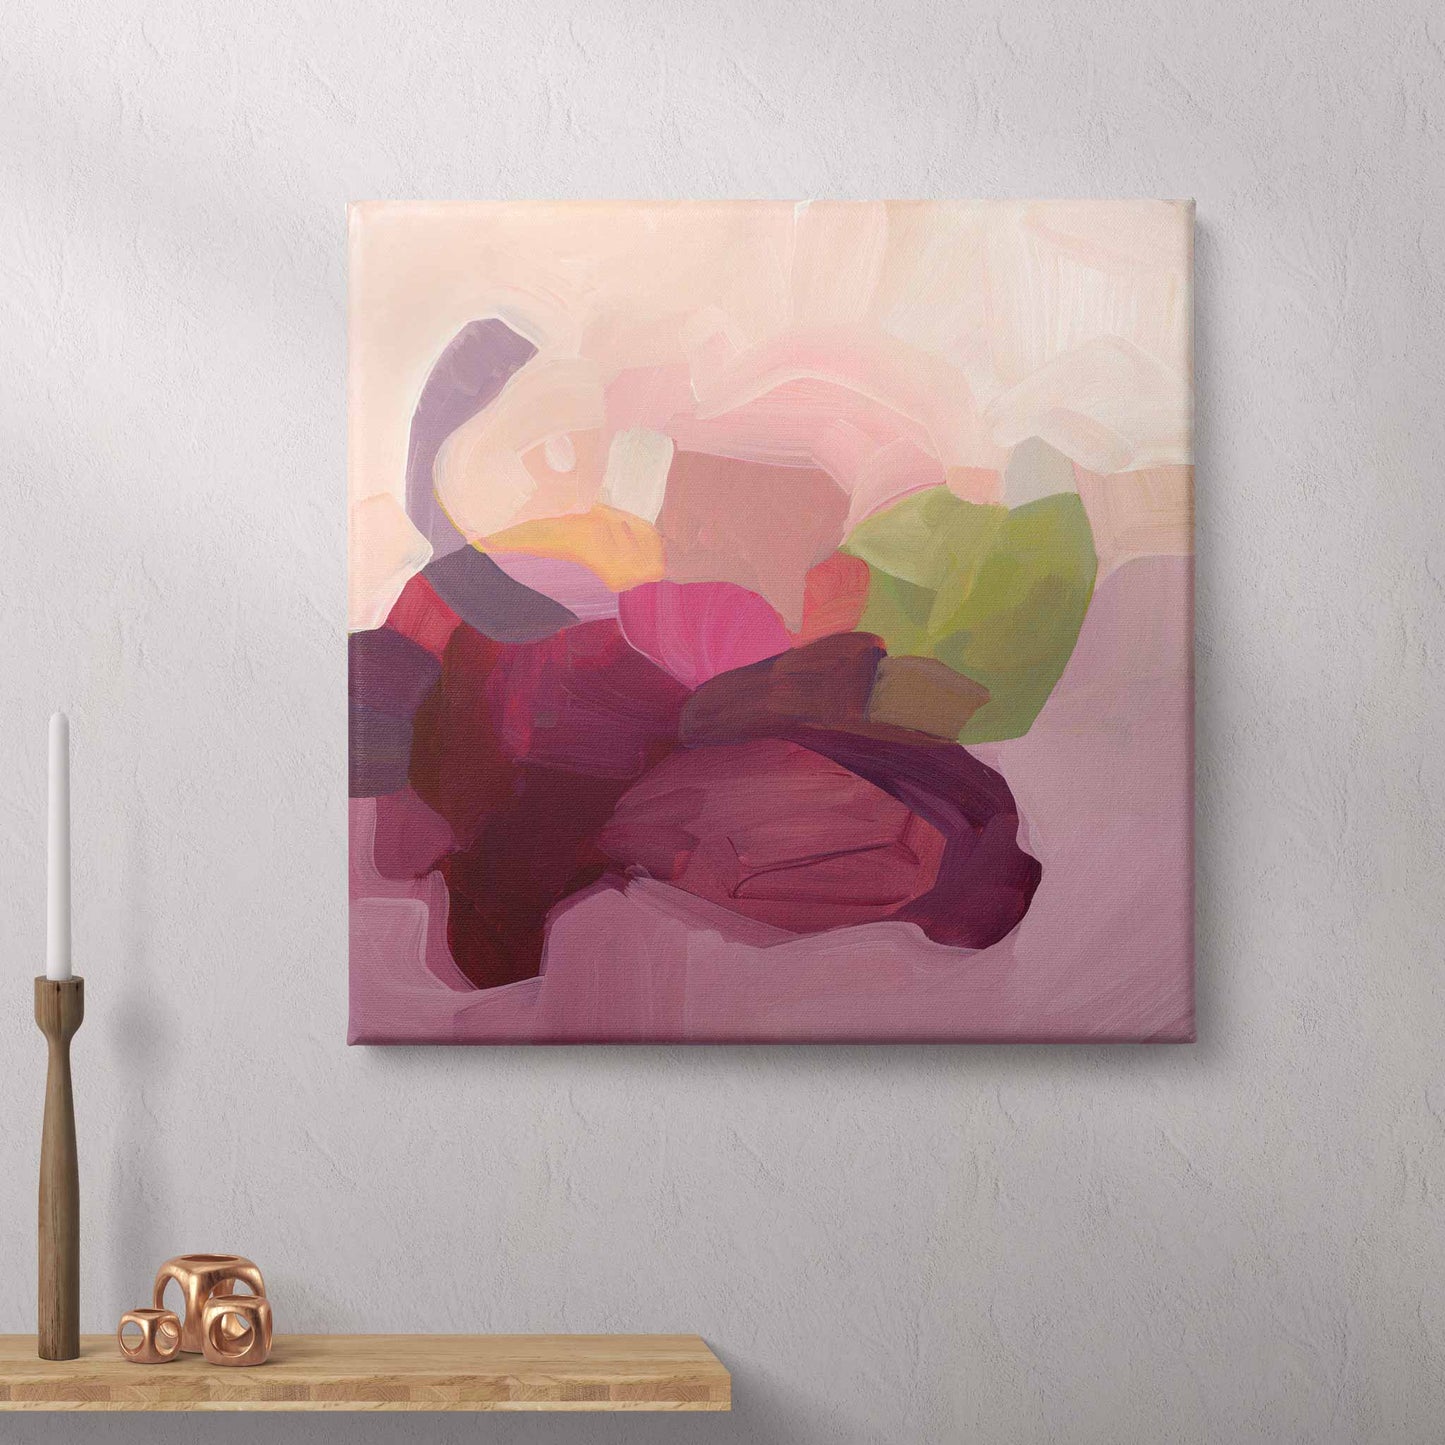 canvas art print of a plum colored abstract painting by Canadian artist Susannah Bleasby